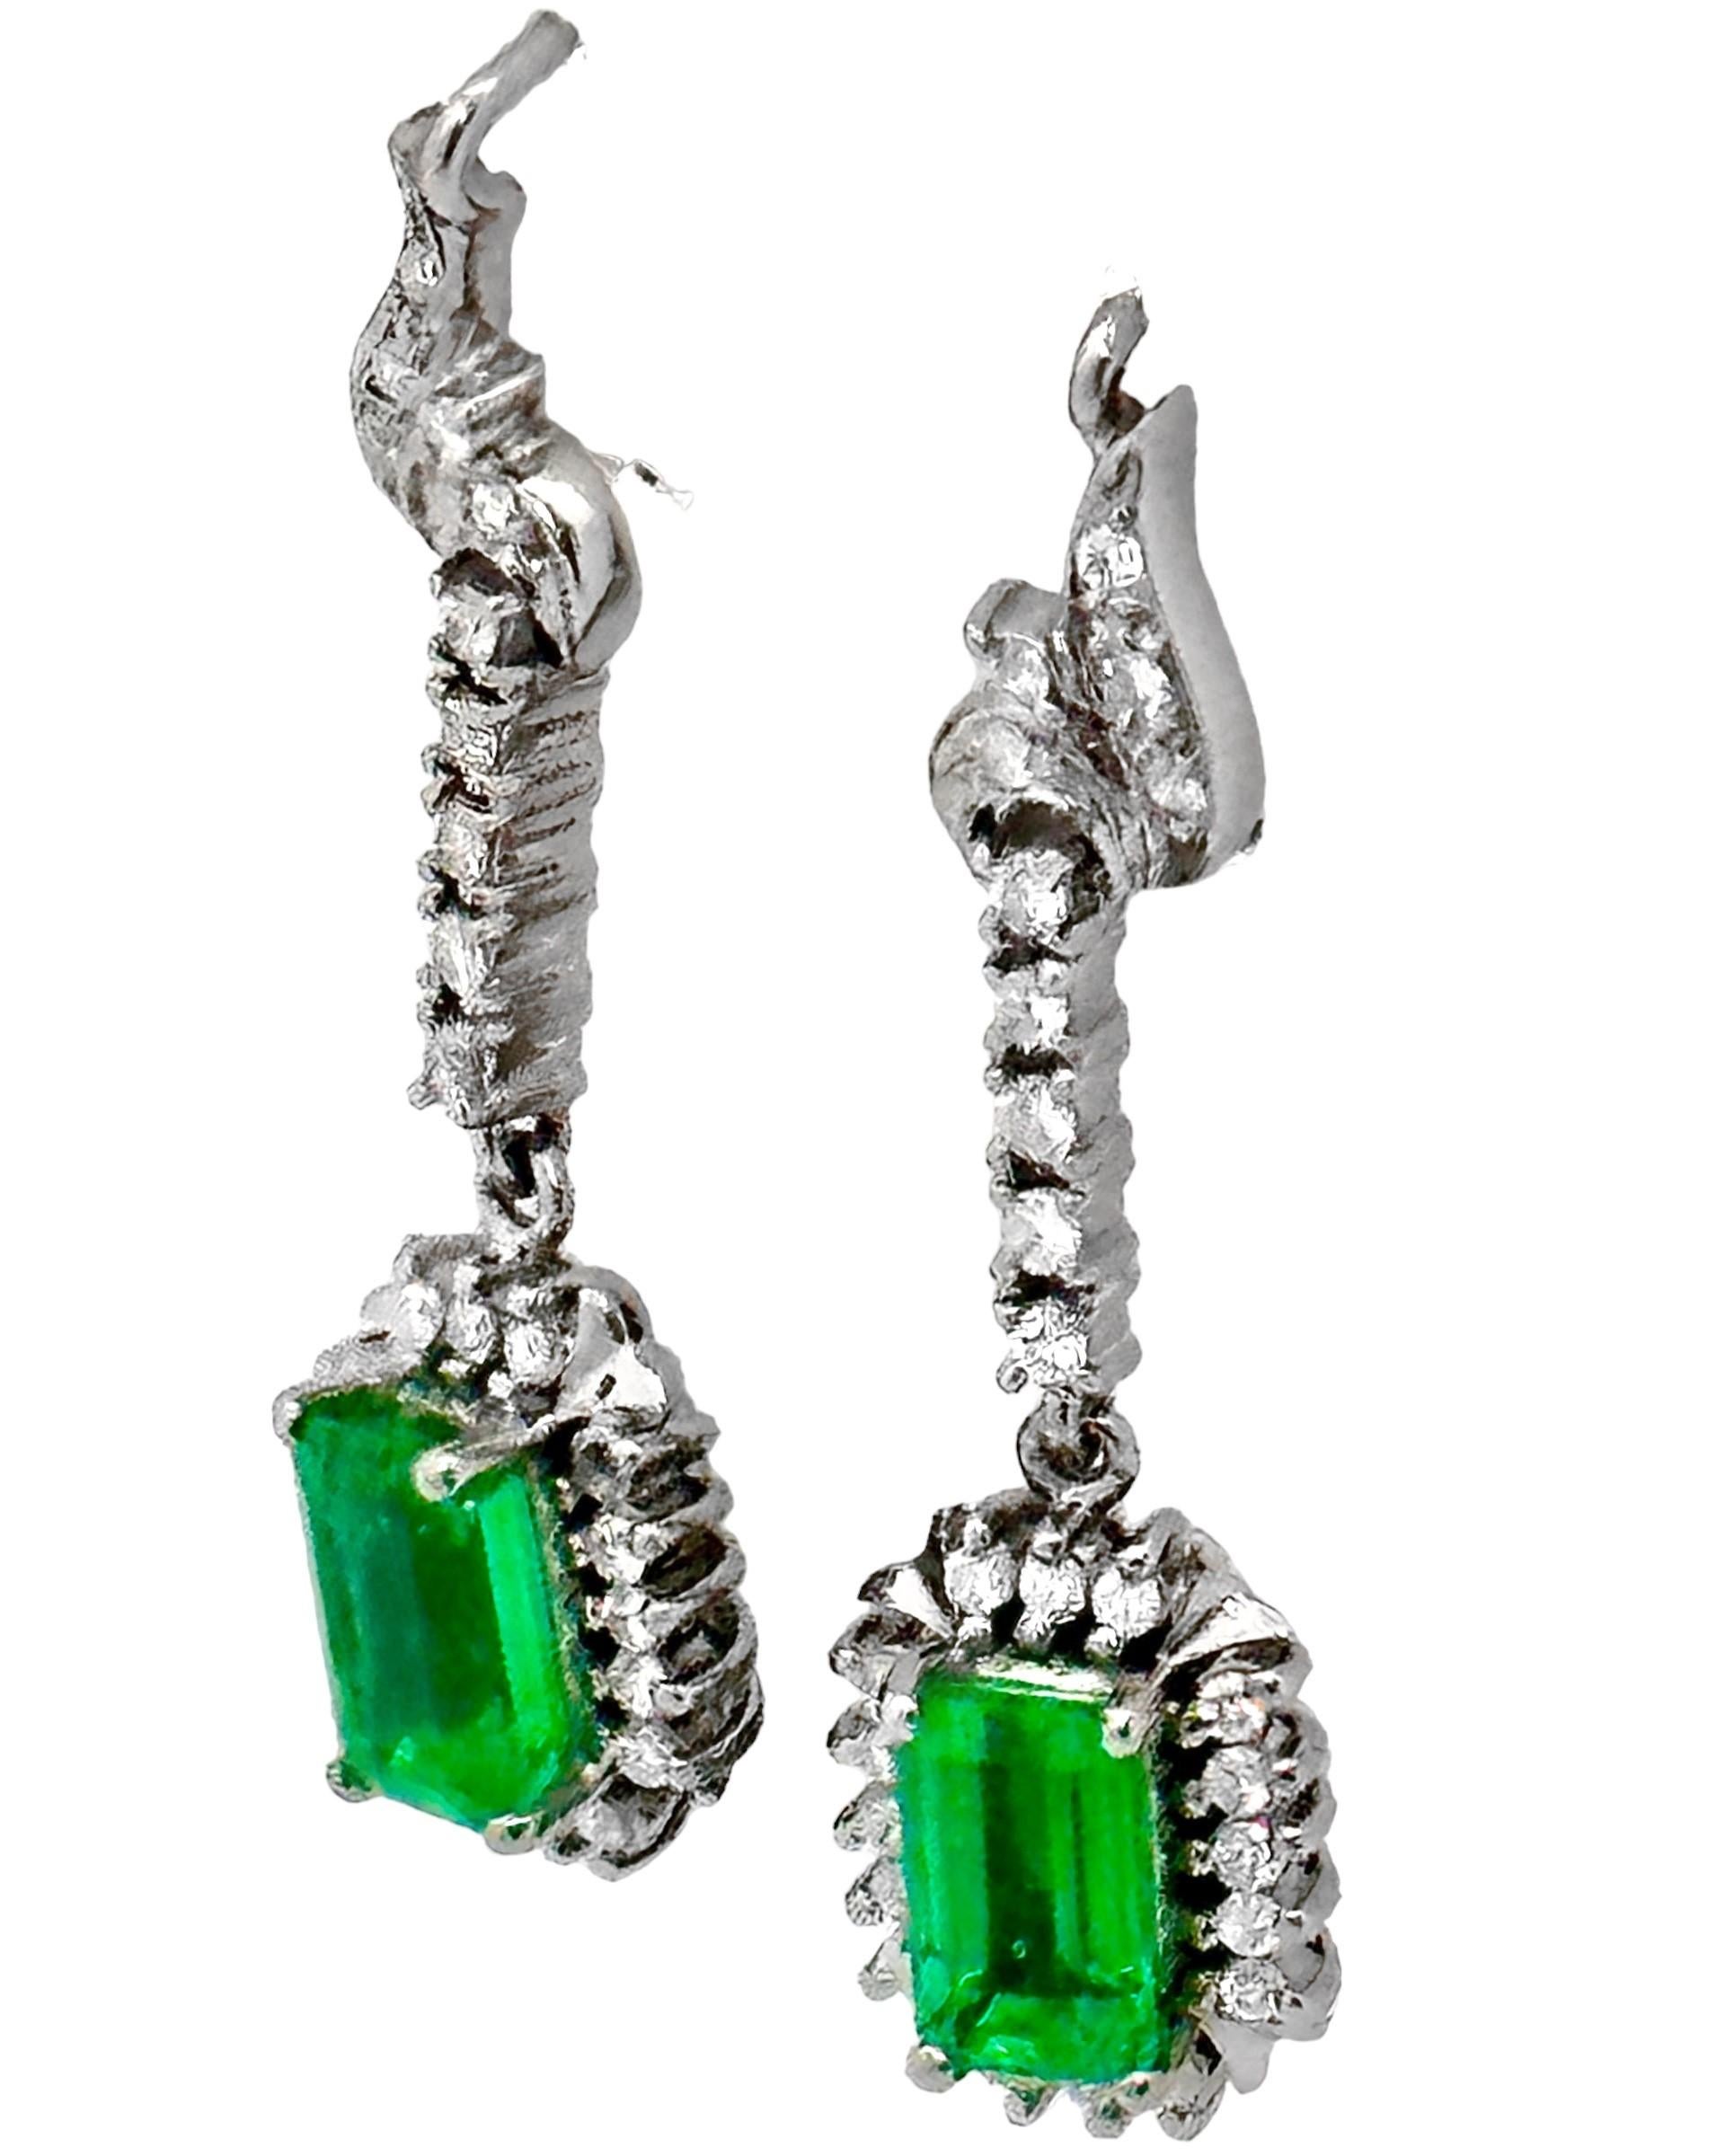 This classic pair of earrings, crafted in 18k white gold, is set with two vibrant and vivid natural emerald cut emeralds which have an approximate total weight of 2.00ct. The entirety of the pair is set top to bottom with small brilliant cut